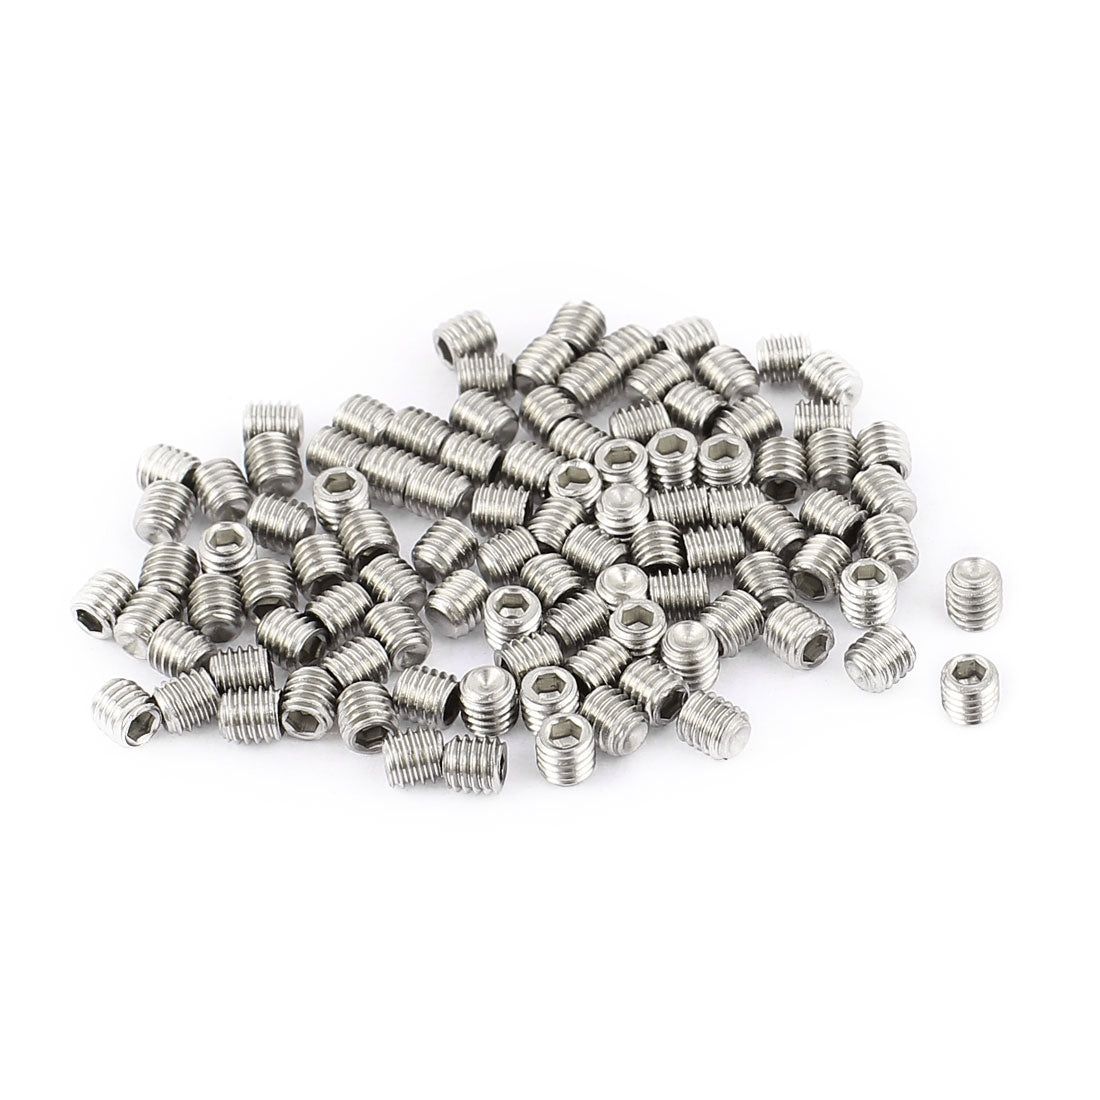 uxcell Uxcell 100Pcs M3 x 3mm Stainless Steel Hex Socket Set Grub Screws Headless Cup Point